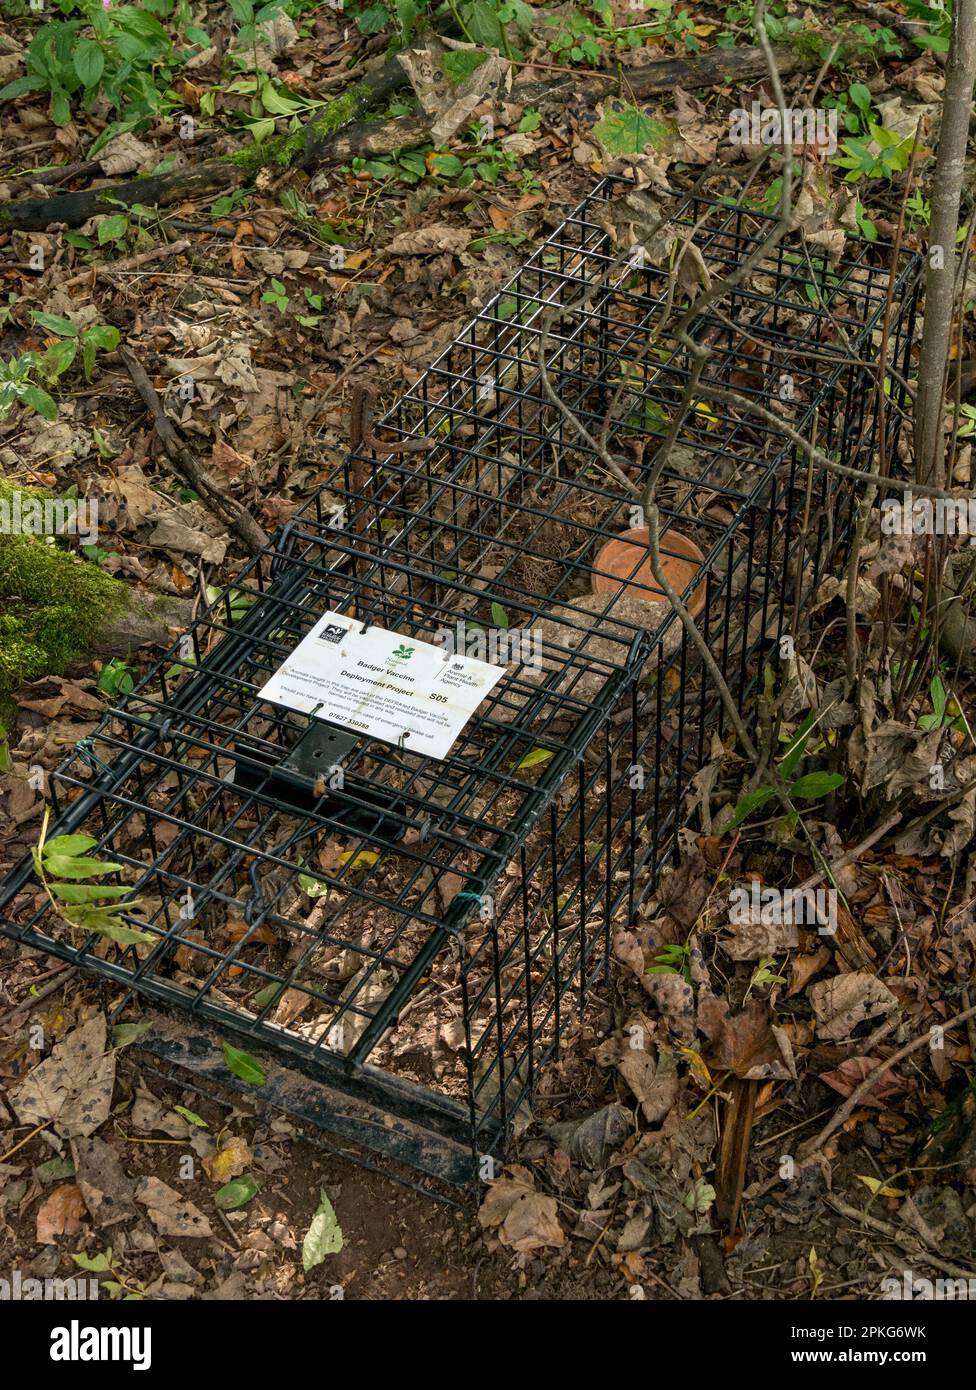 DEFRA Badger Vaccination development project / program wire cage badger trap with bait, Derbyshire, England, UK Stock Photo